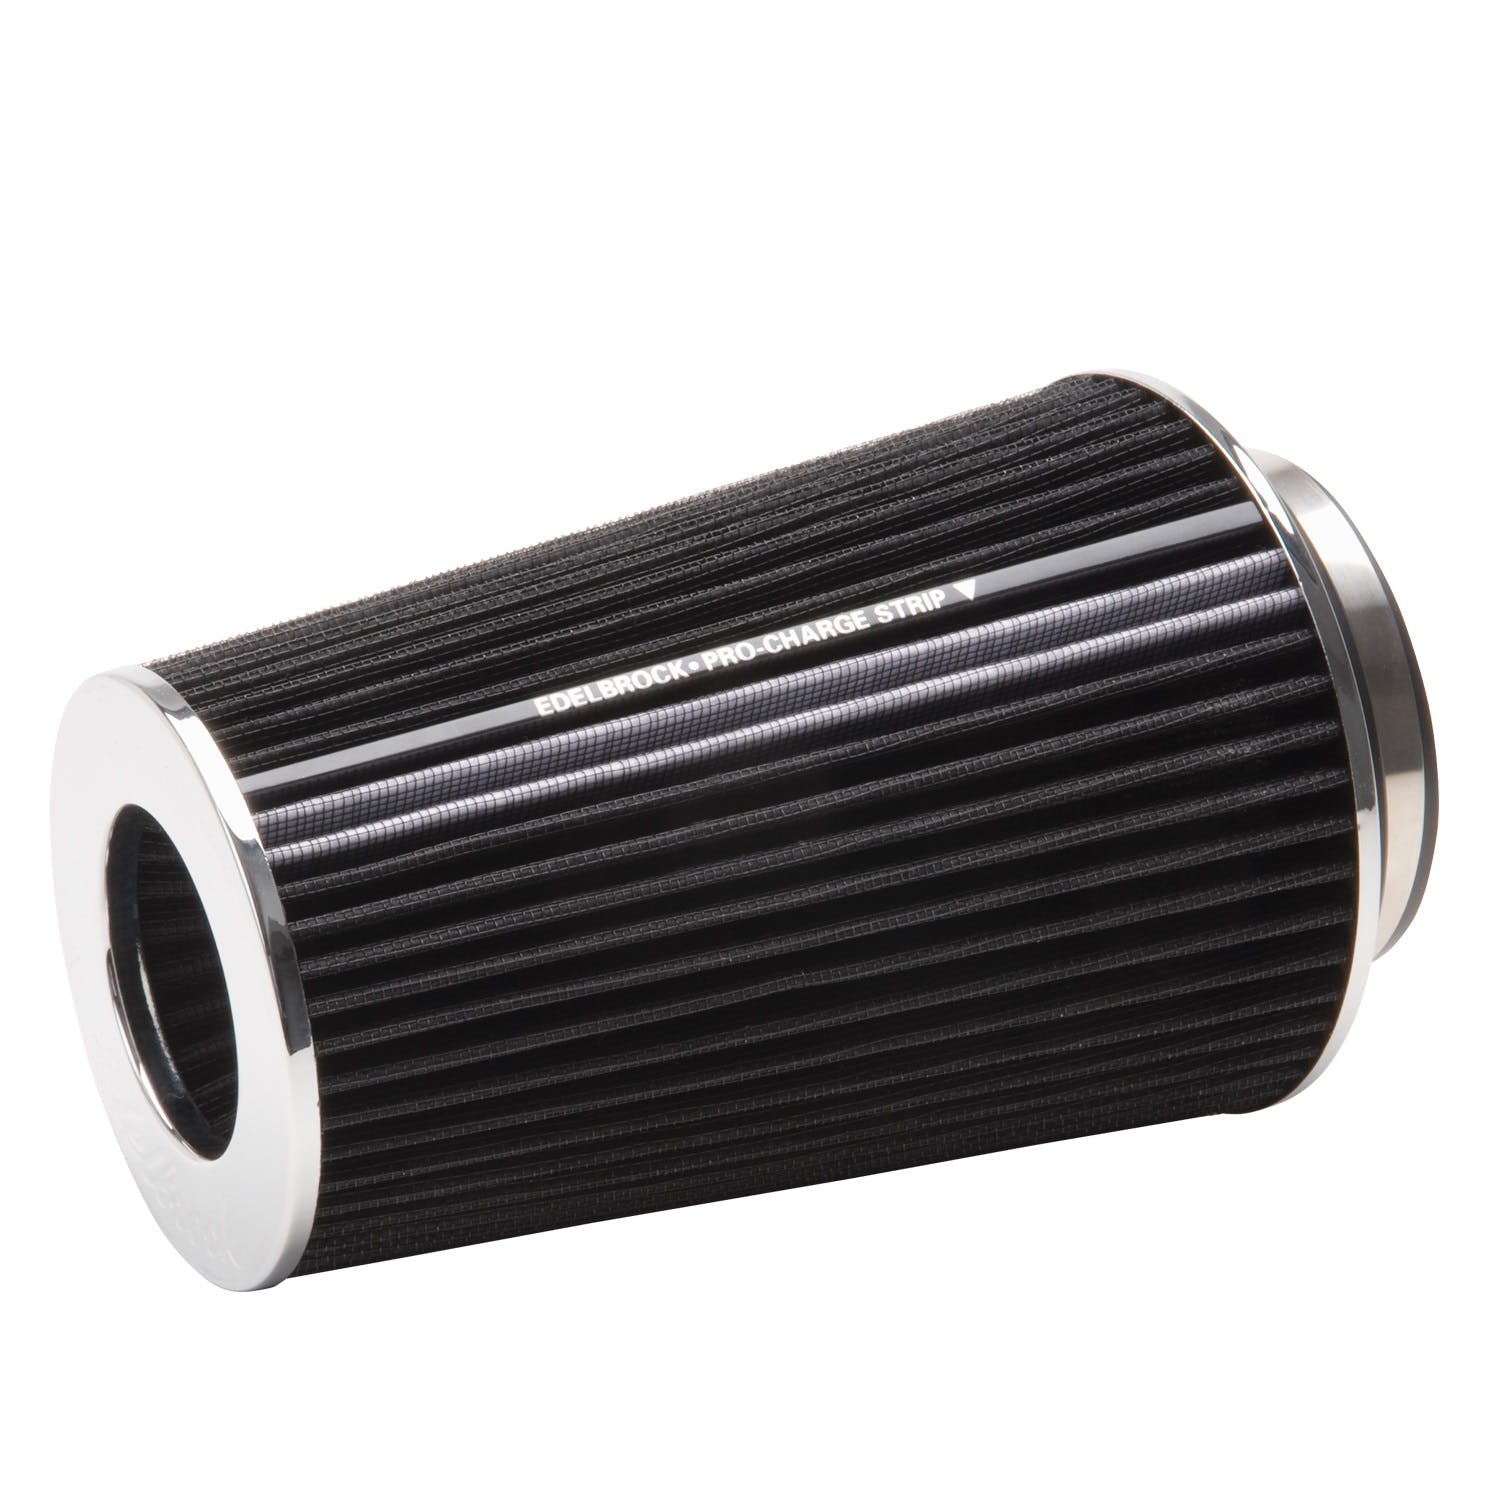 Edelbrock 43690 Pro-Flo Universal Black Tall Conical Air Filter with 3, 3.5, and 4 Inlet